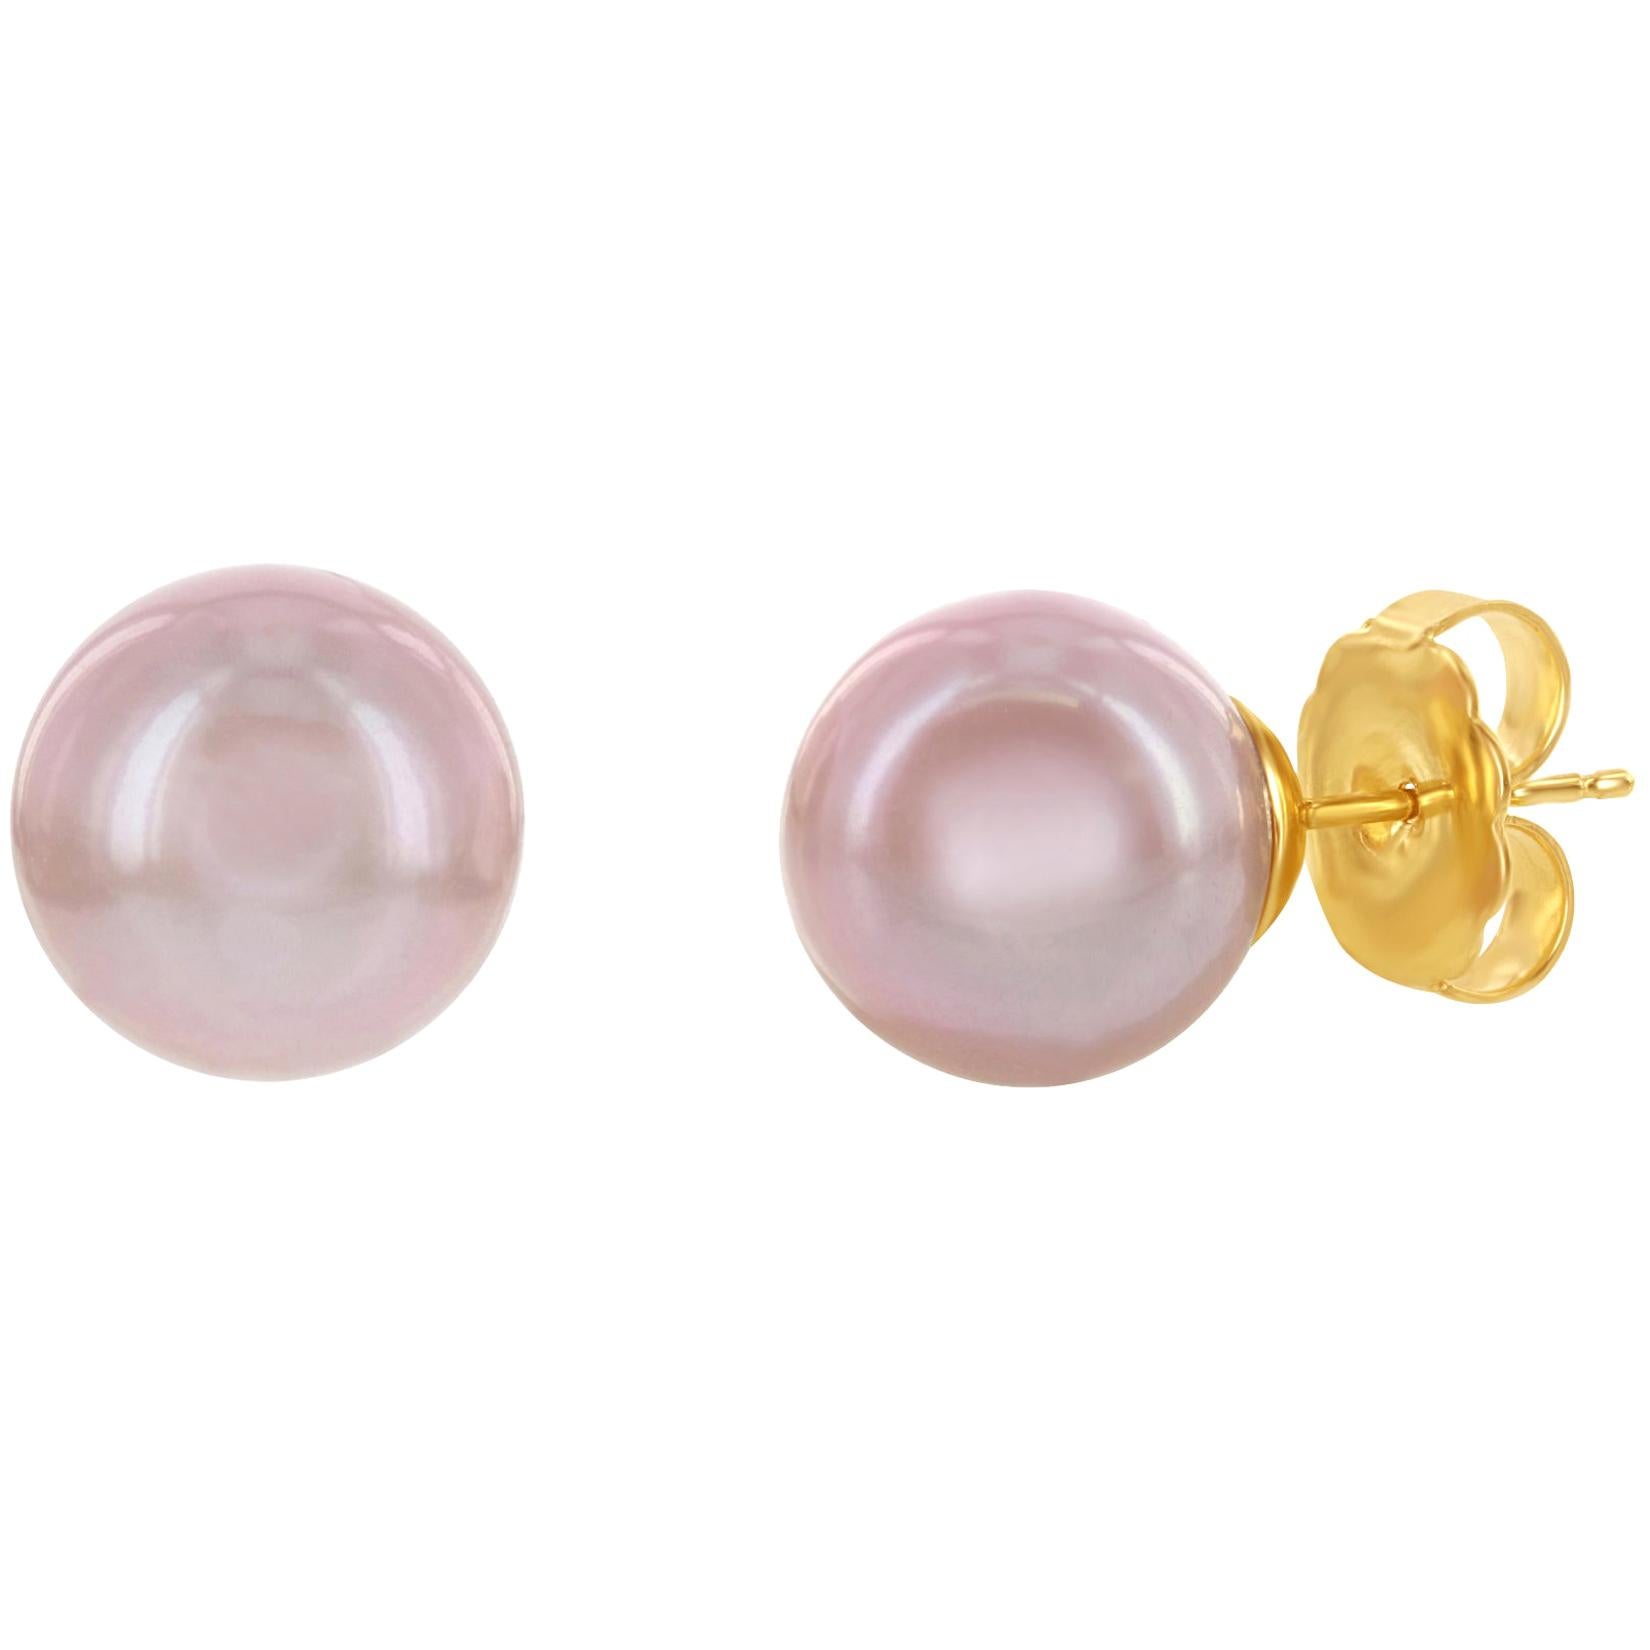 Details about   AAA Pink Cultured Pearl Dangle Stud Earrings; 14k Yellow Gold Unique Design TPJ